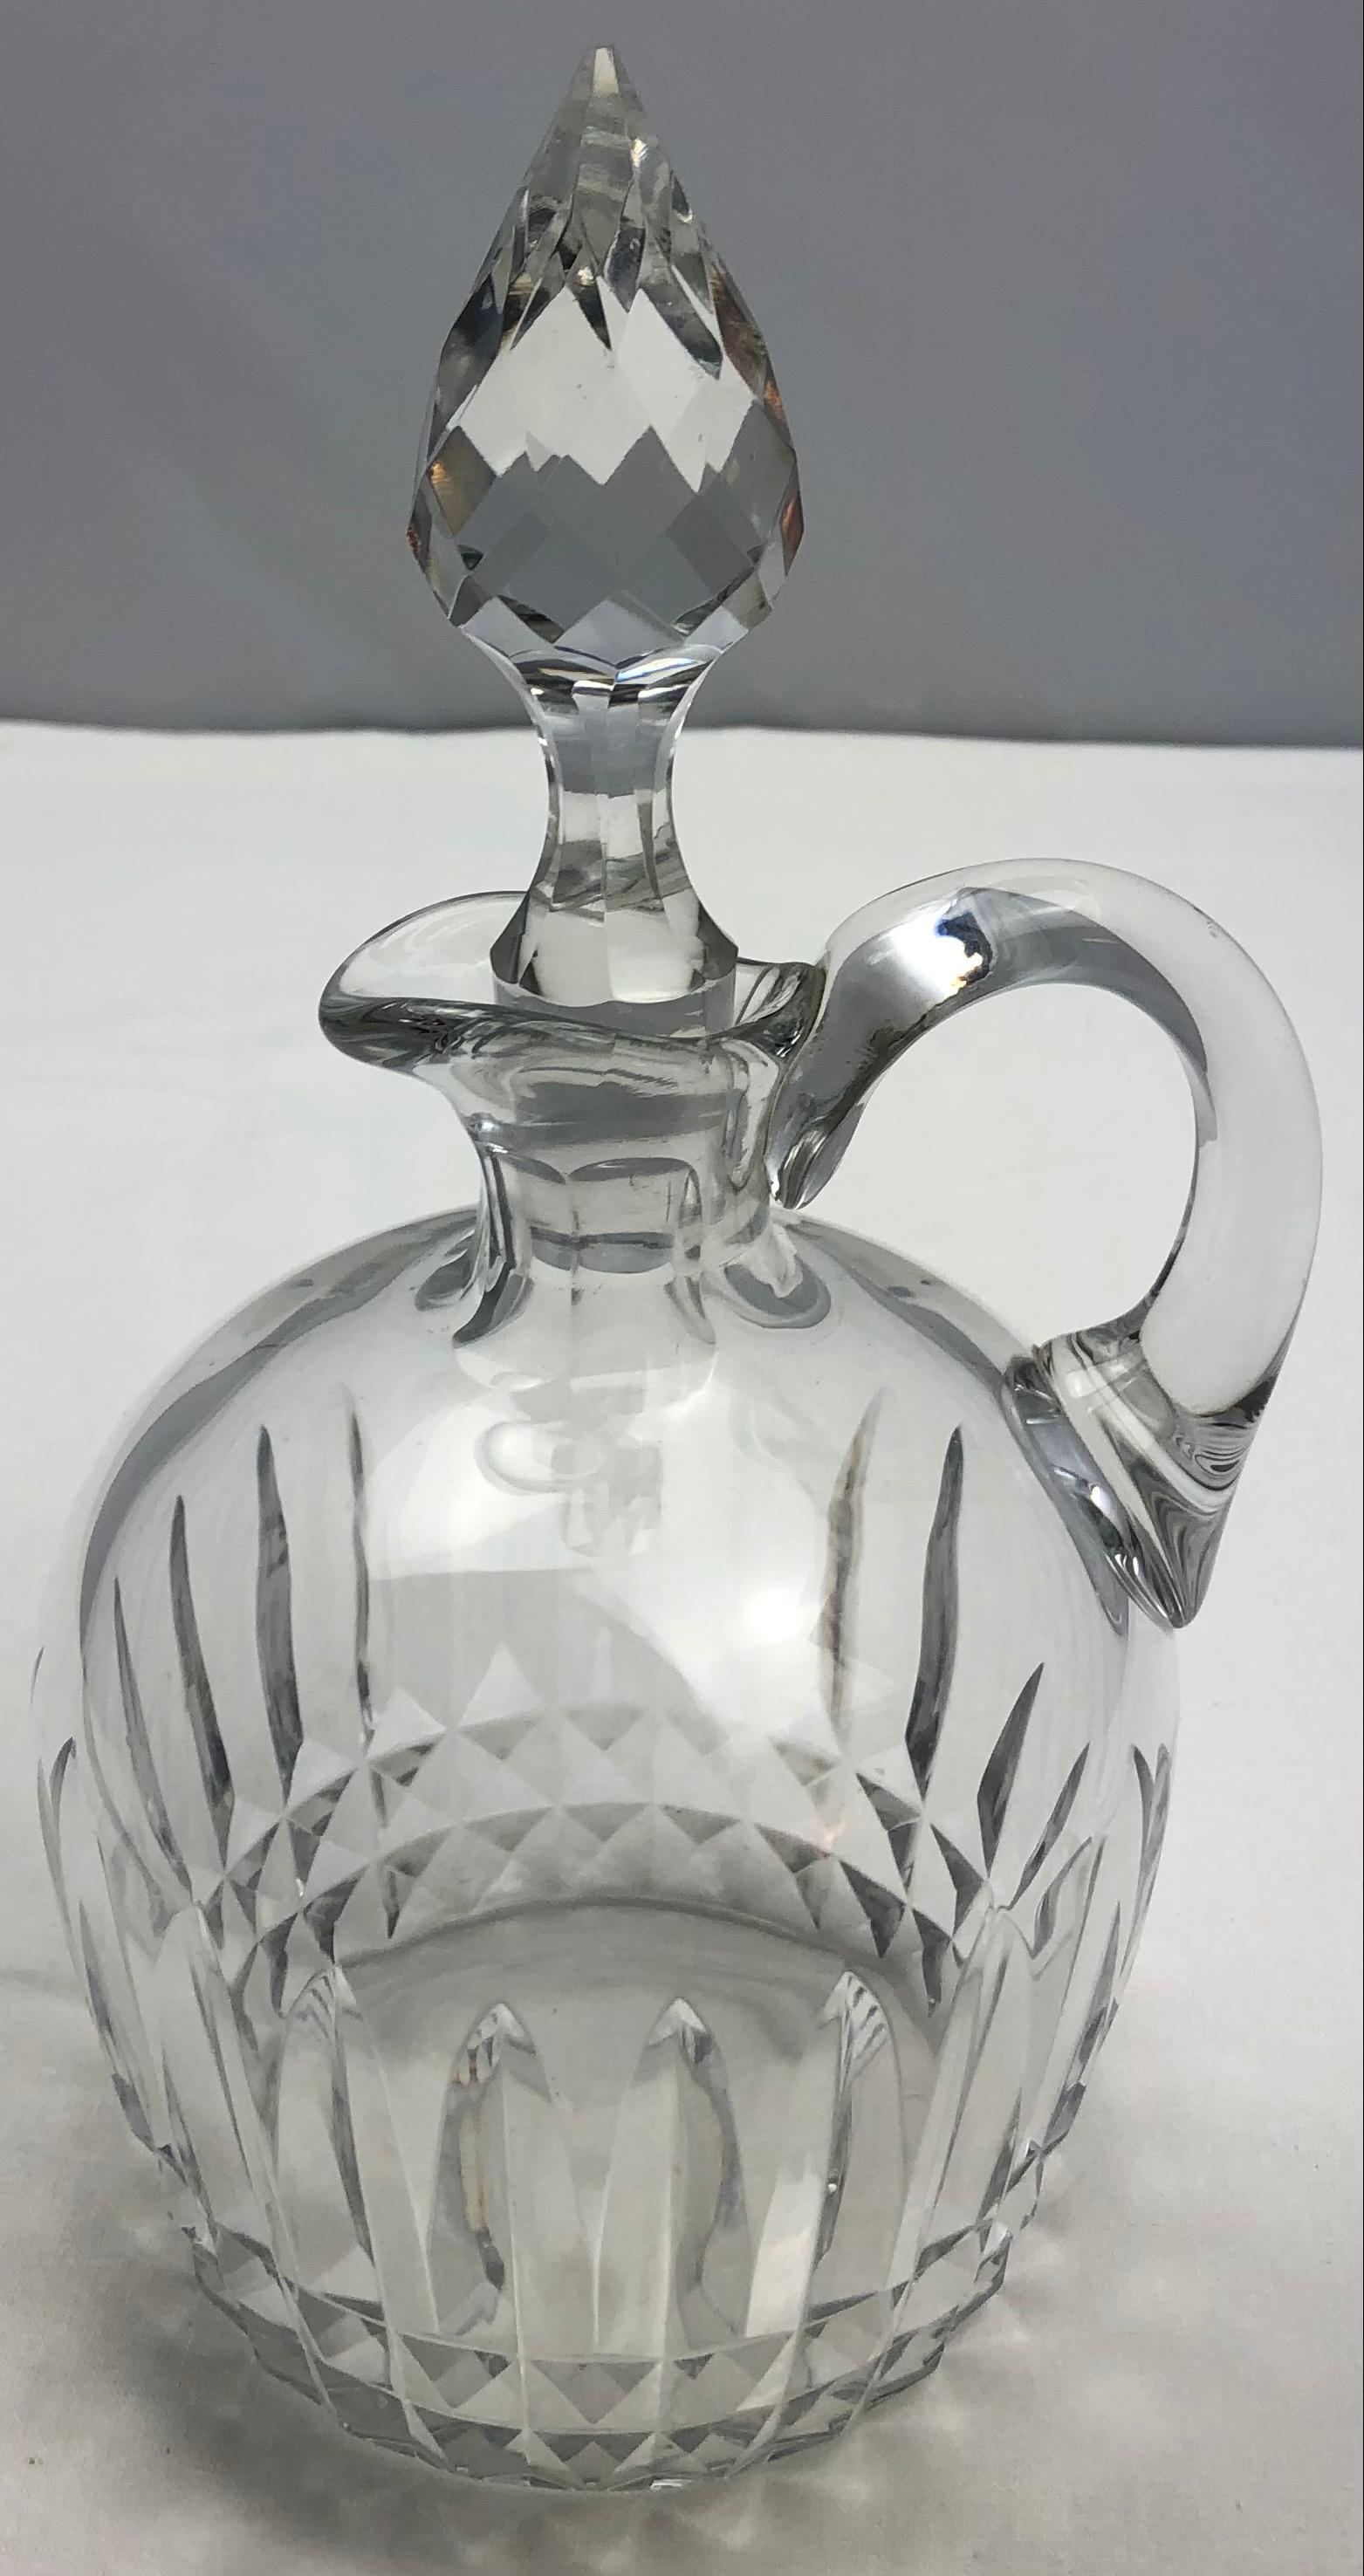 Hand-Crafted Baccarat Crystal Liquor Decanter or Carafe, Mid-20th Century